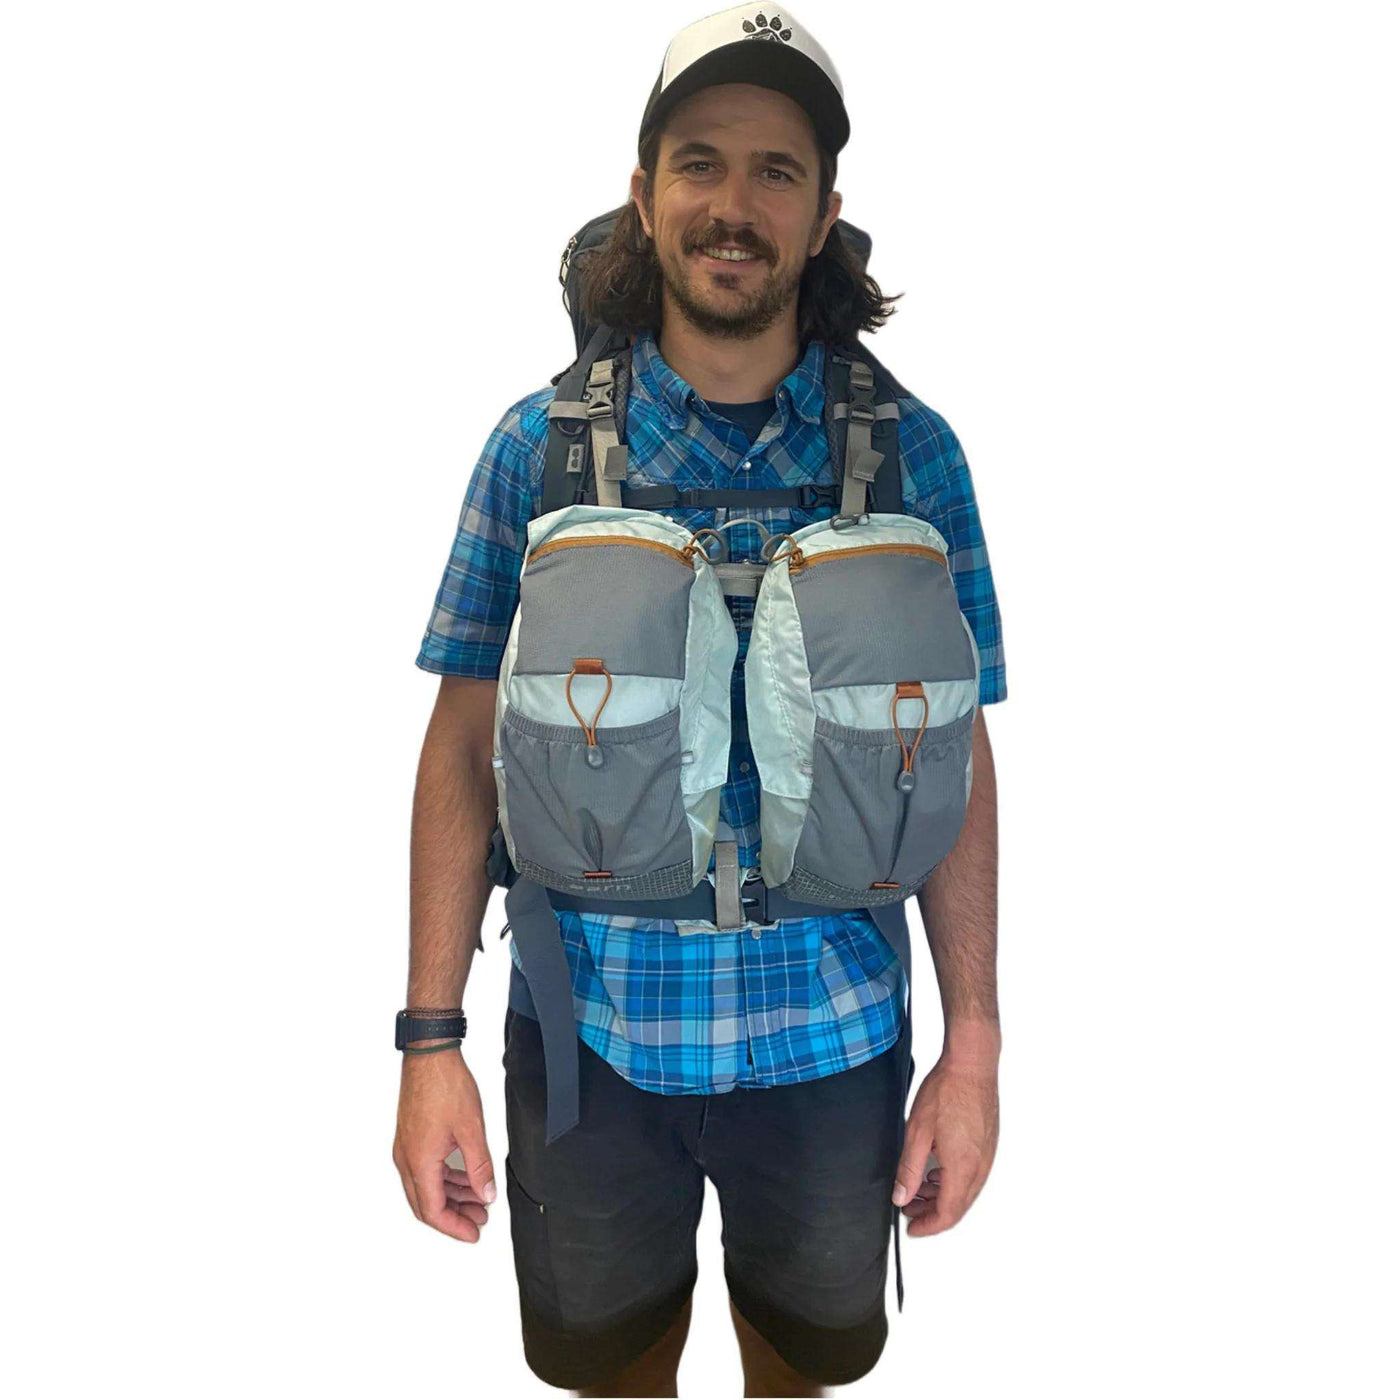 Aarn Universal Balance Bags Small 10L | NZ | Hiking Pack Accessories | Further Faster Christchurch NZ | #grey